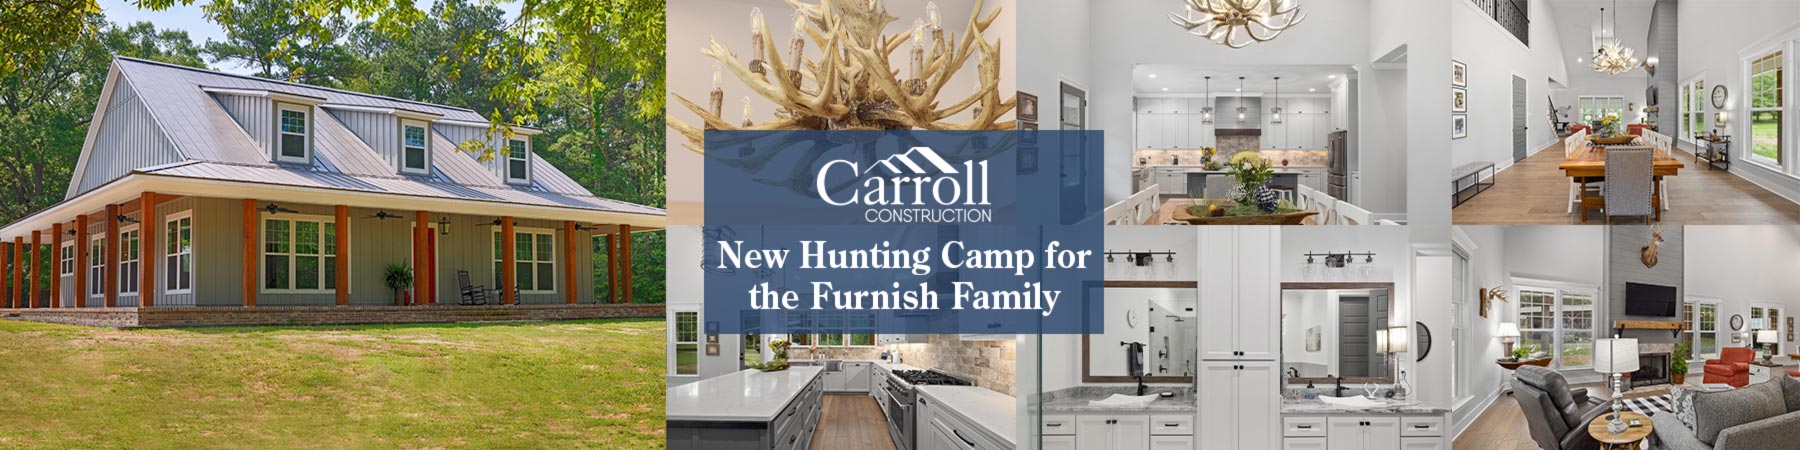 Luxury Hunting Camp for the Furnish Family